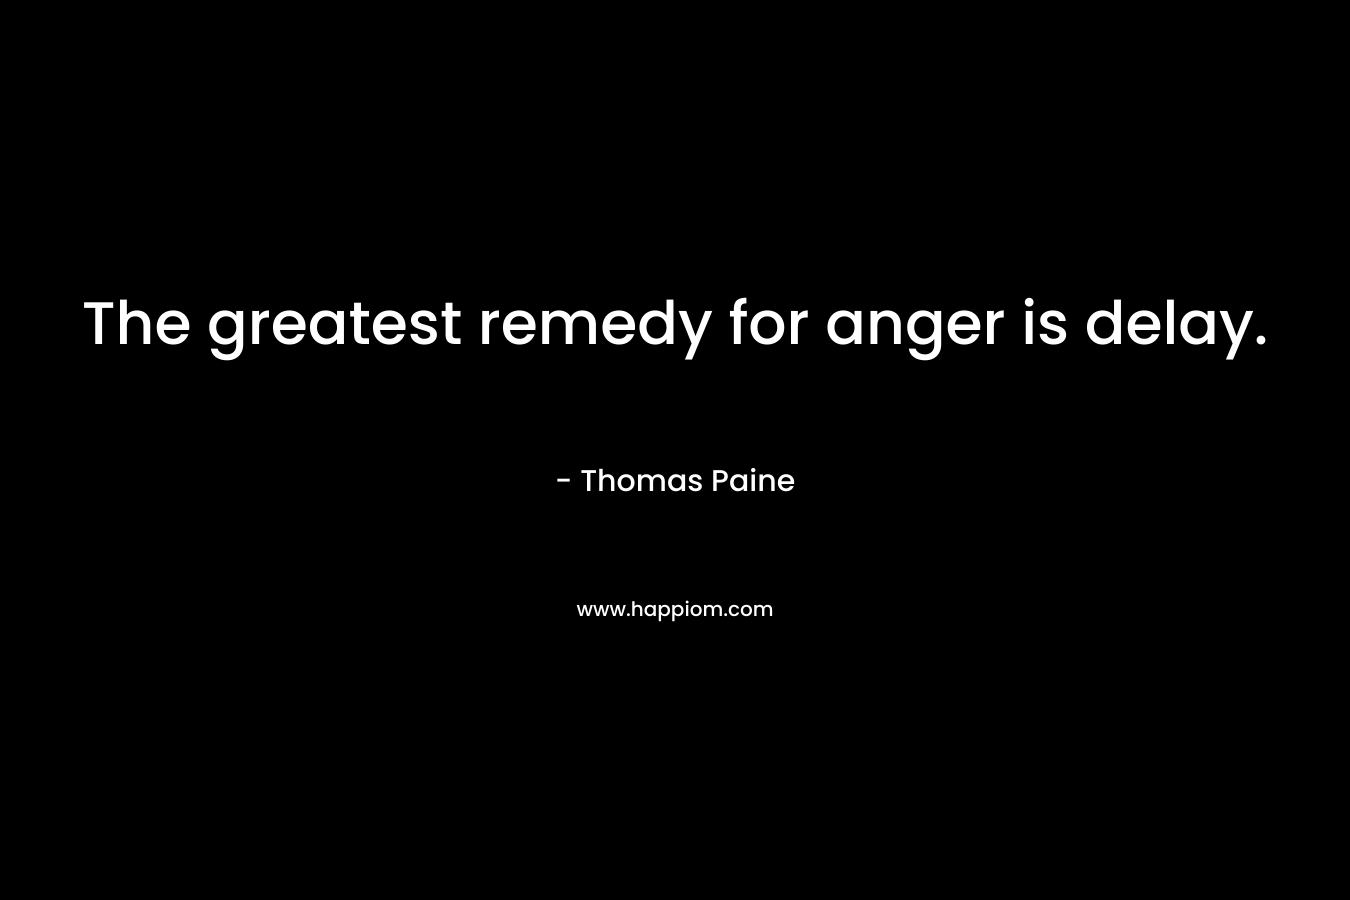 The greatest remedy for anger is delay.